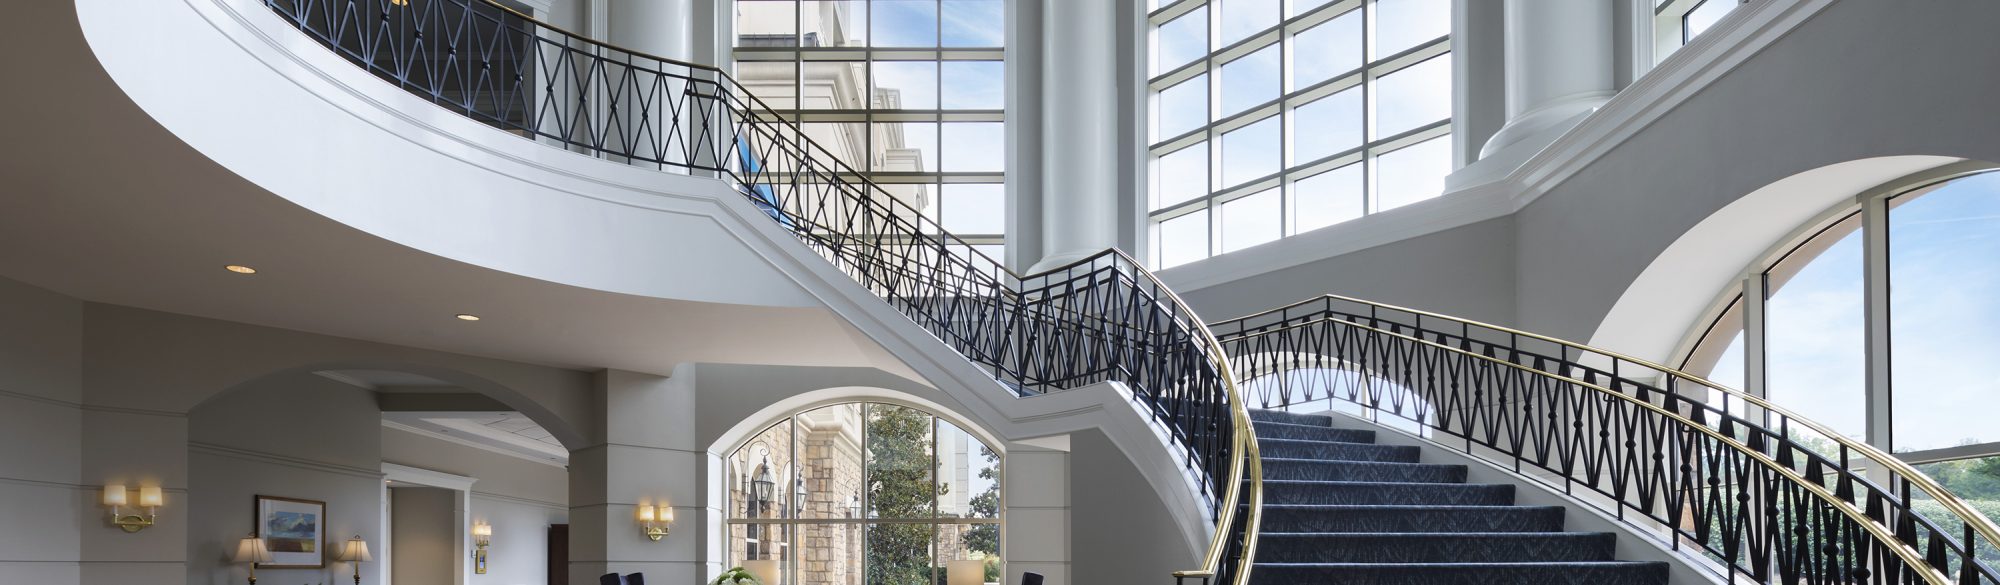 Grand Staircase and Atrium at The Ballantyne, A Luxury Collection Hotel, Charlotte